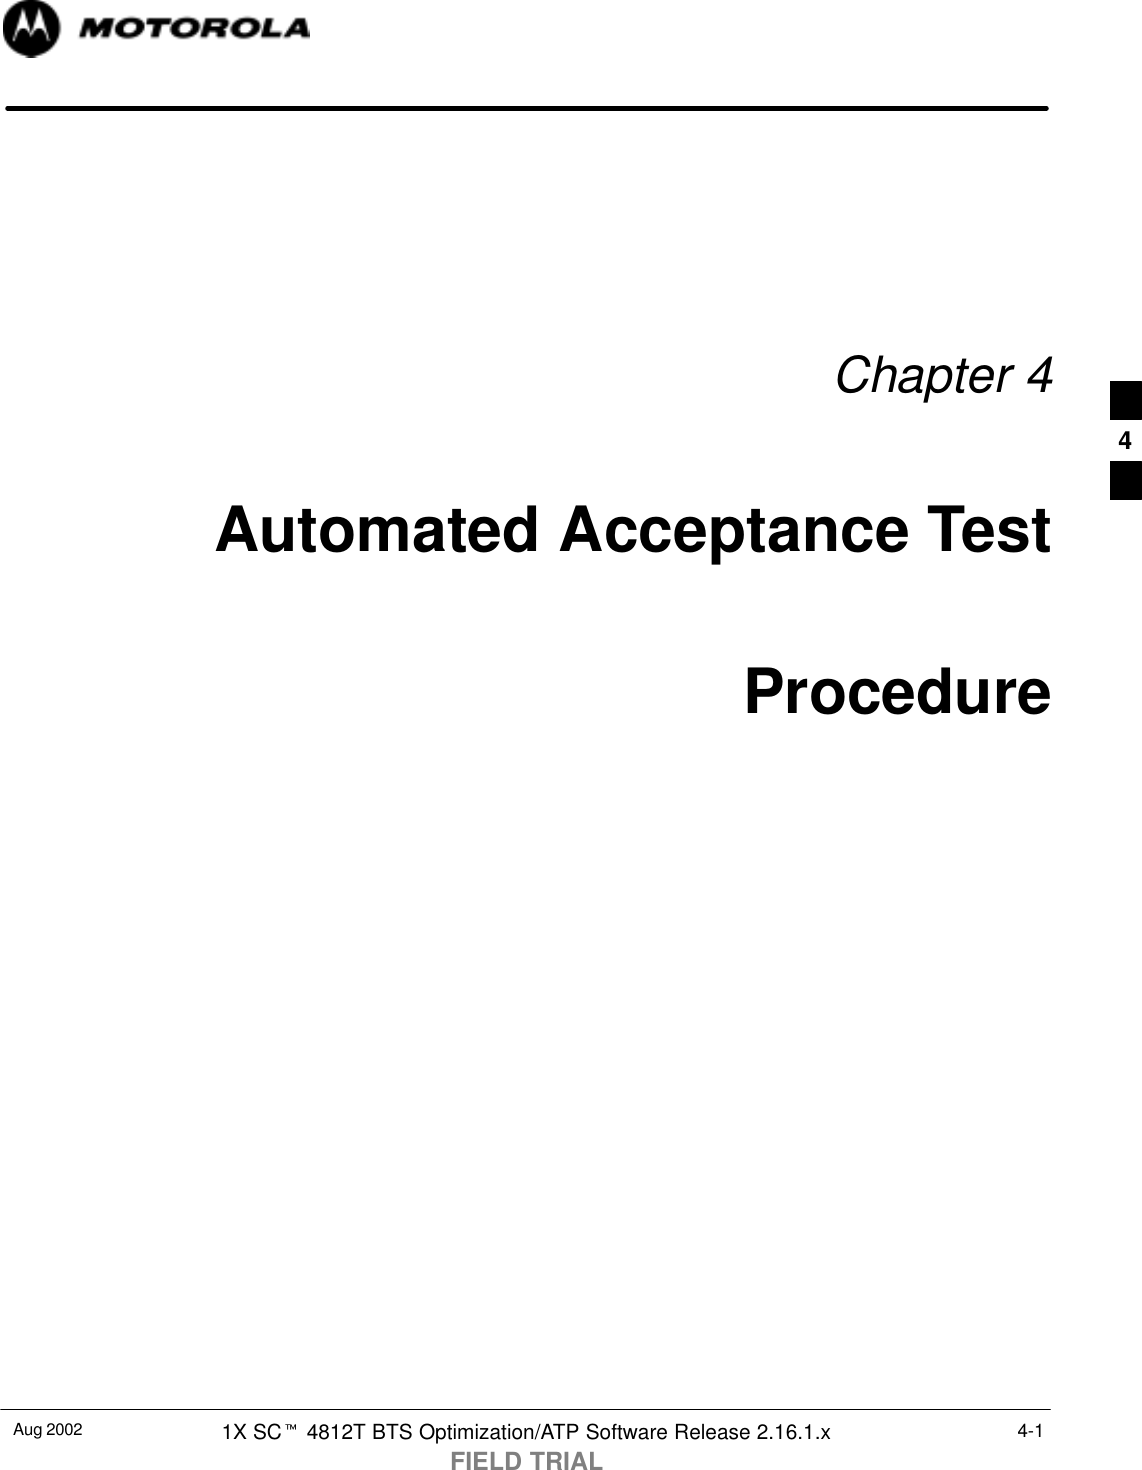 Aug 2002 1X SCt 4812T BTS Optimization/ATP Software Release 2.16.1.xFIELD TRIAL4-1Chapter 4Automated Acceptance TestProcedure4